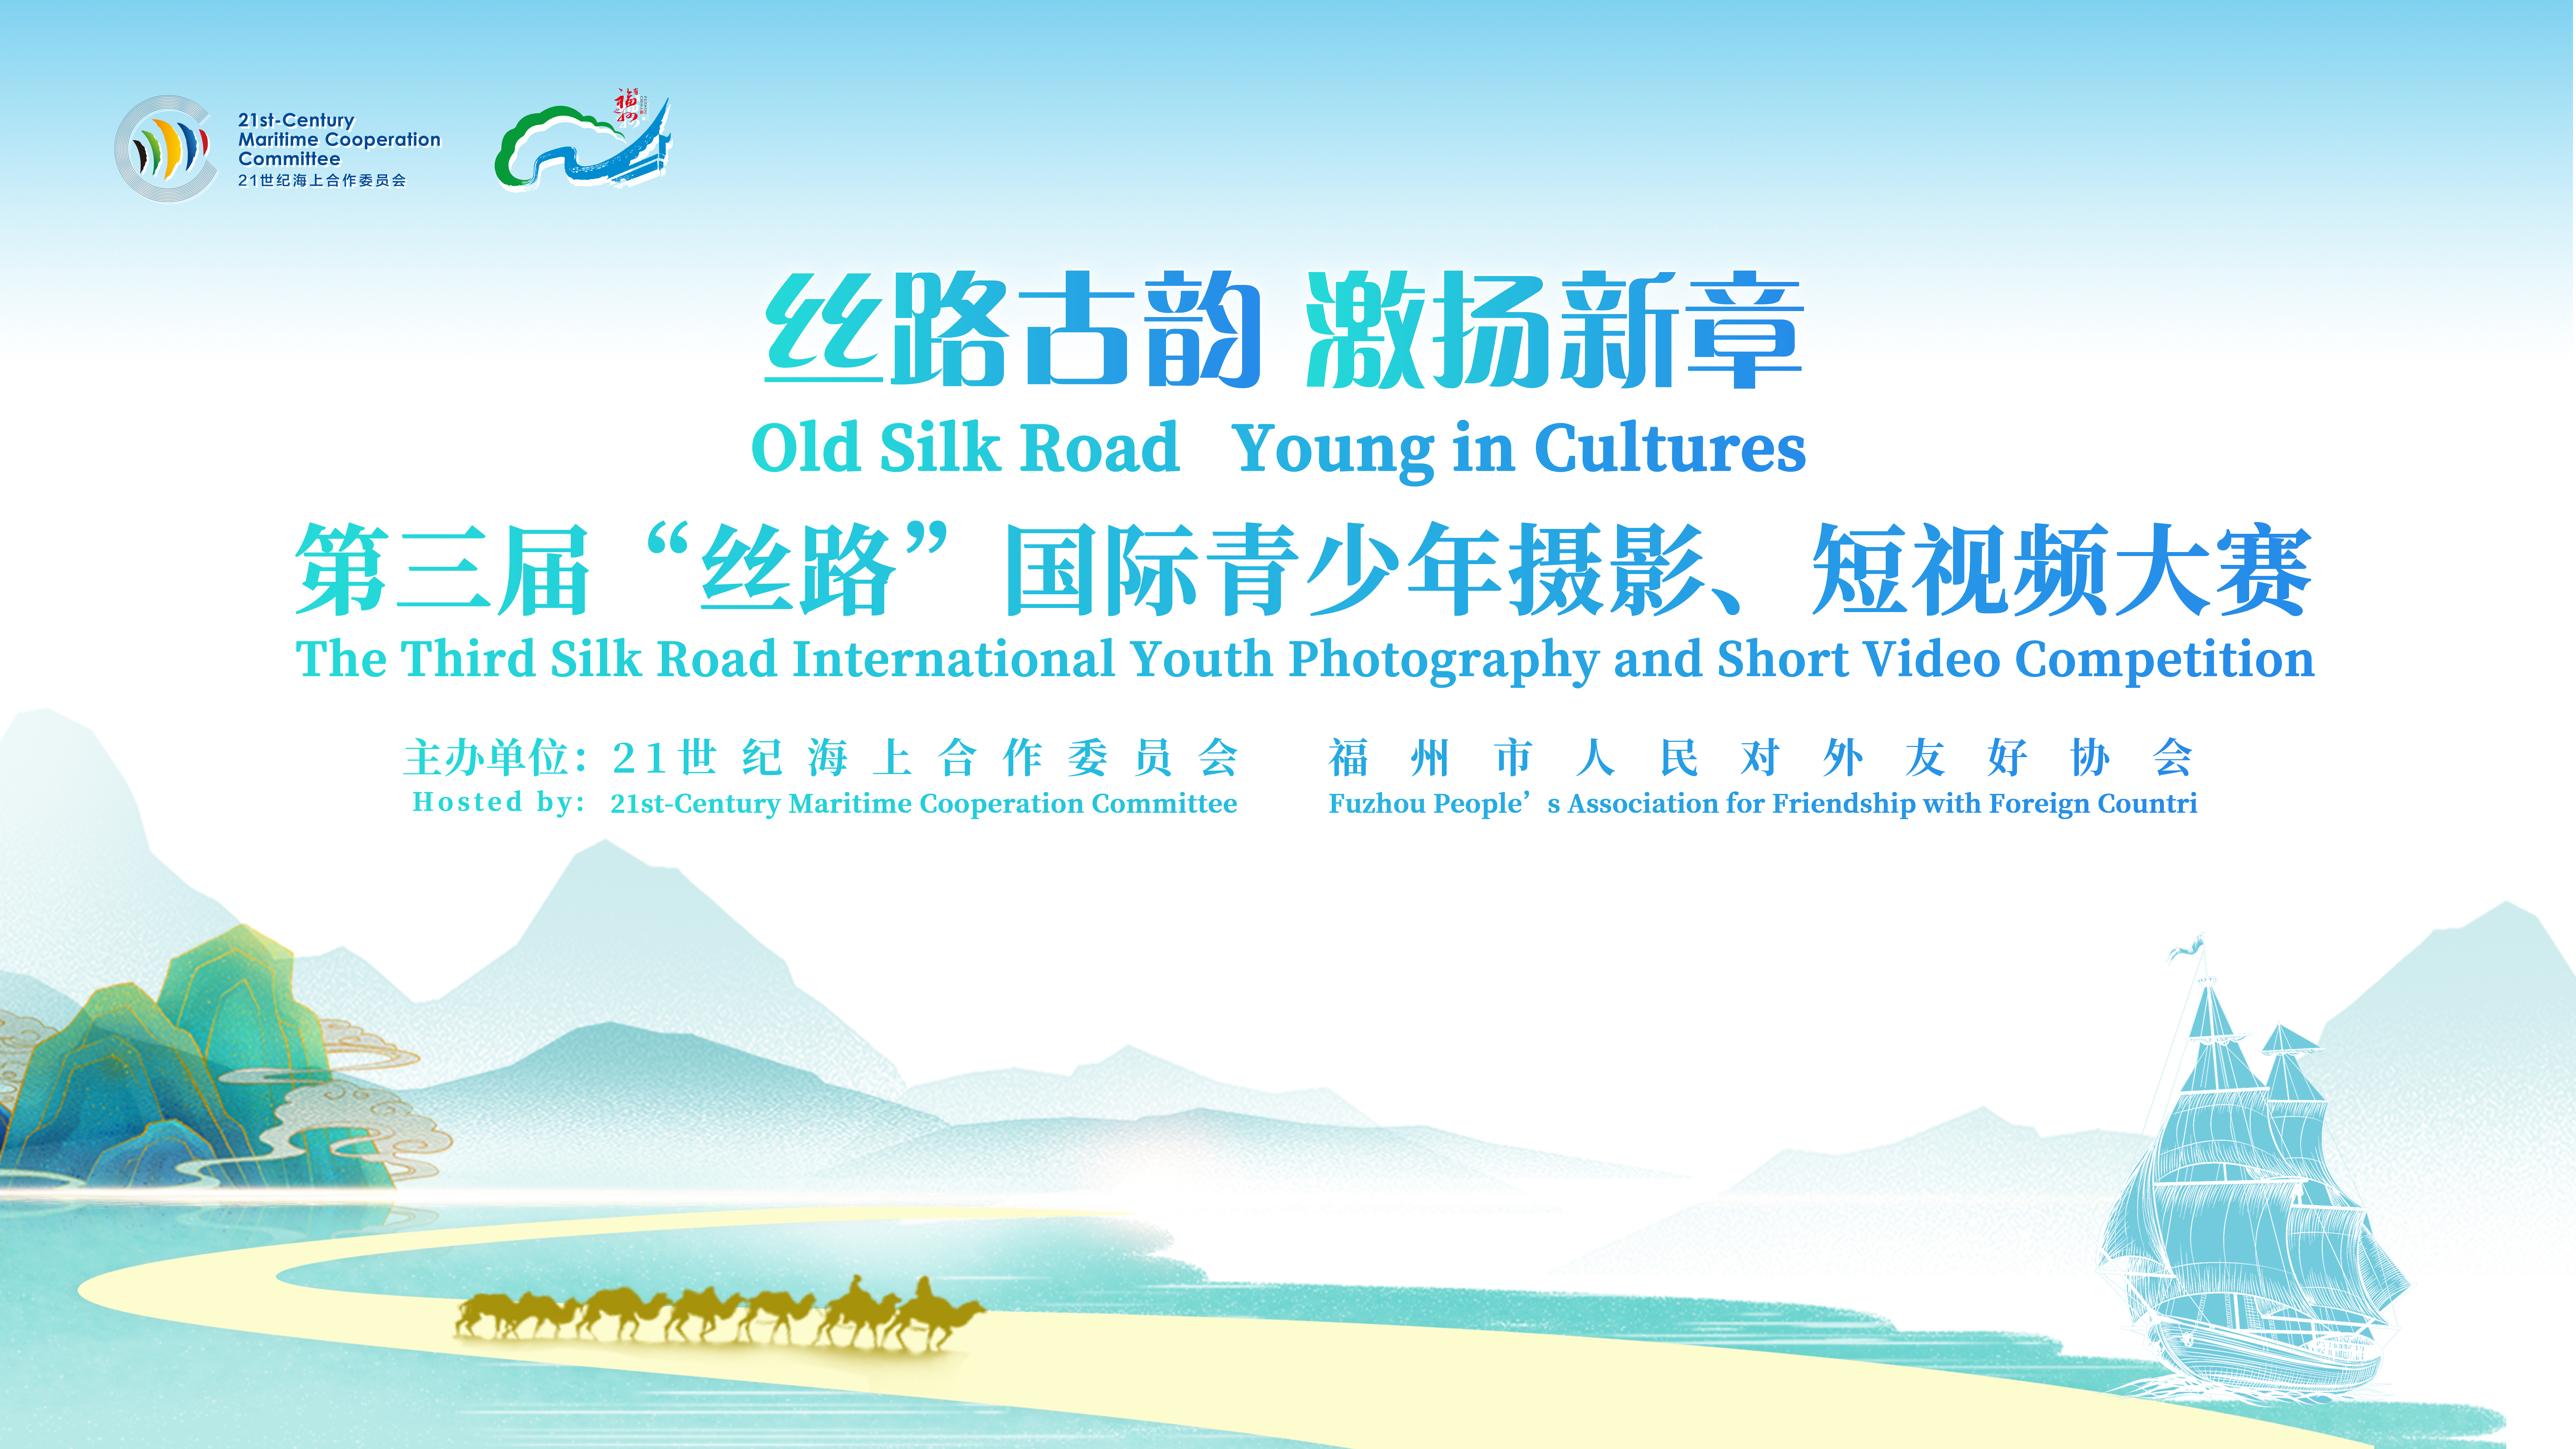 The Third Silk Road International Youth Photography and Short Video Competition